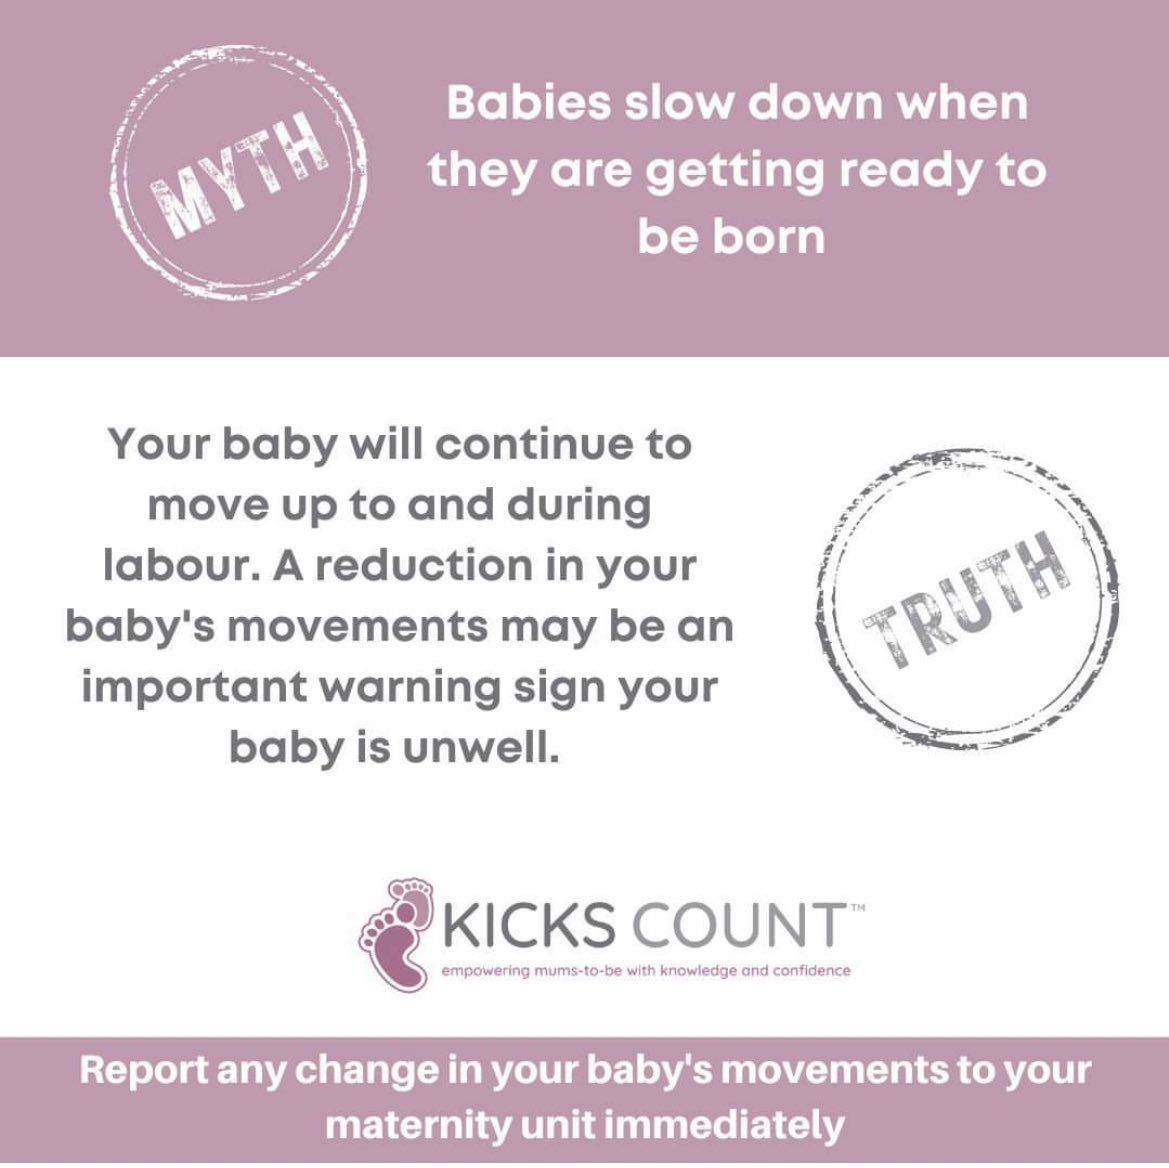 PLEASE SHARE @BBC!! Having just told 1.6 million Doctors viewers “At 38 weeks the baby doesn’t move as much because there’s not enough room” you need to correct this!!! BABYS DO NOT SLOW DOWN..The show has already gone out so please at least share this information now.